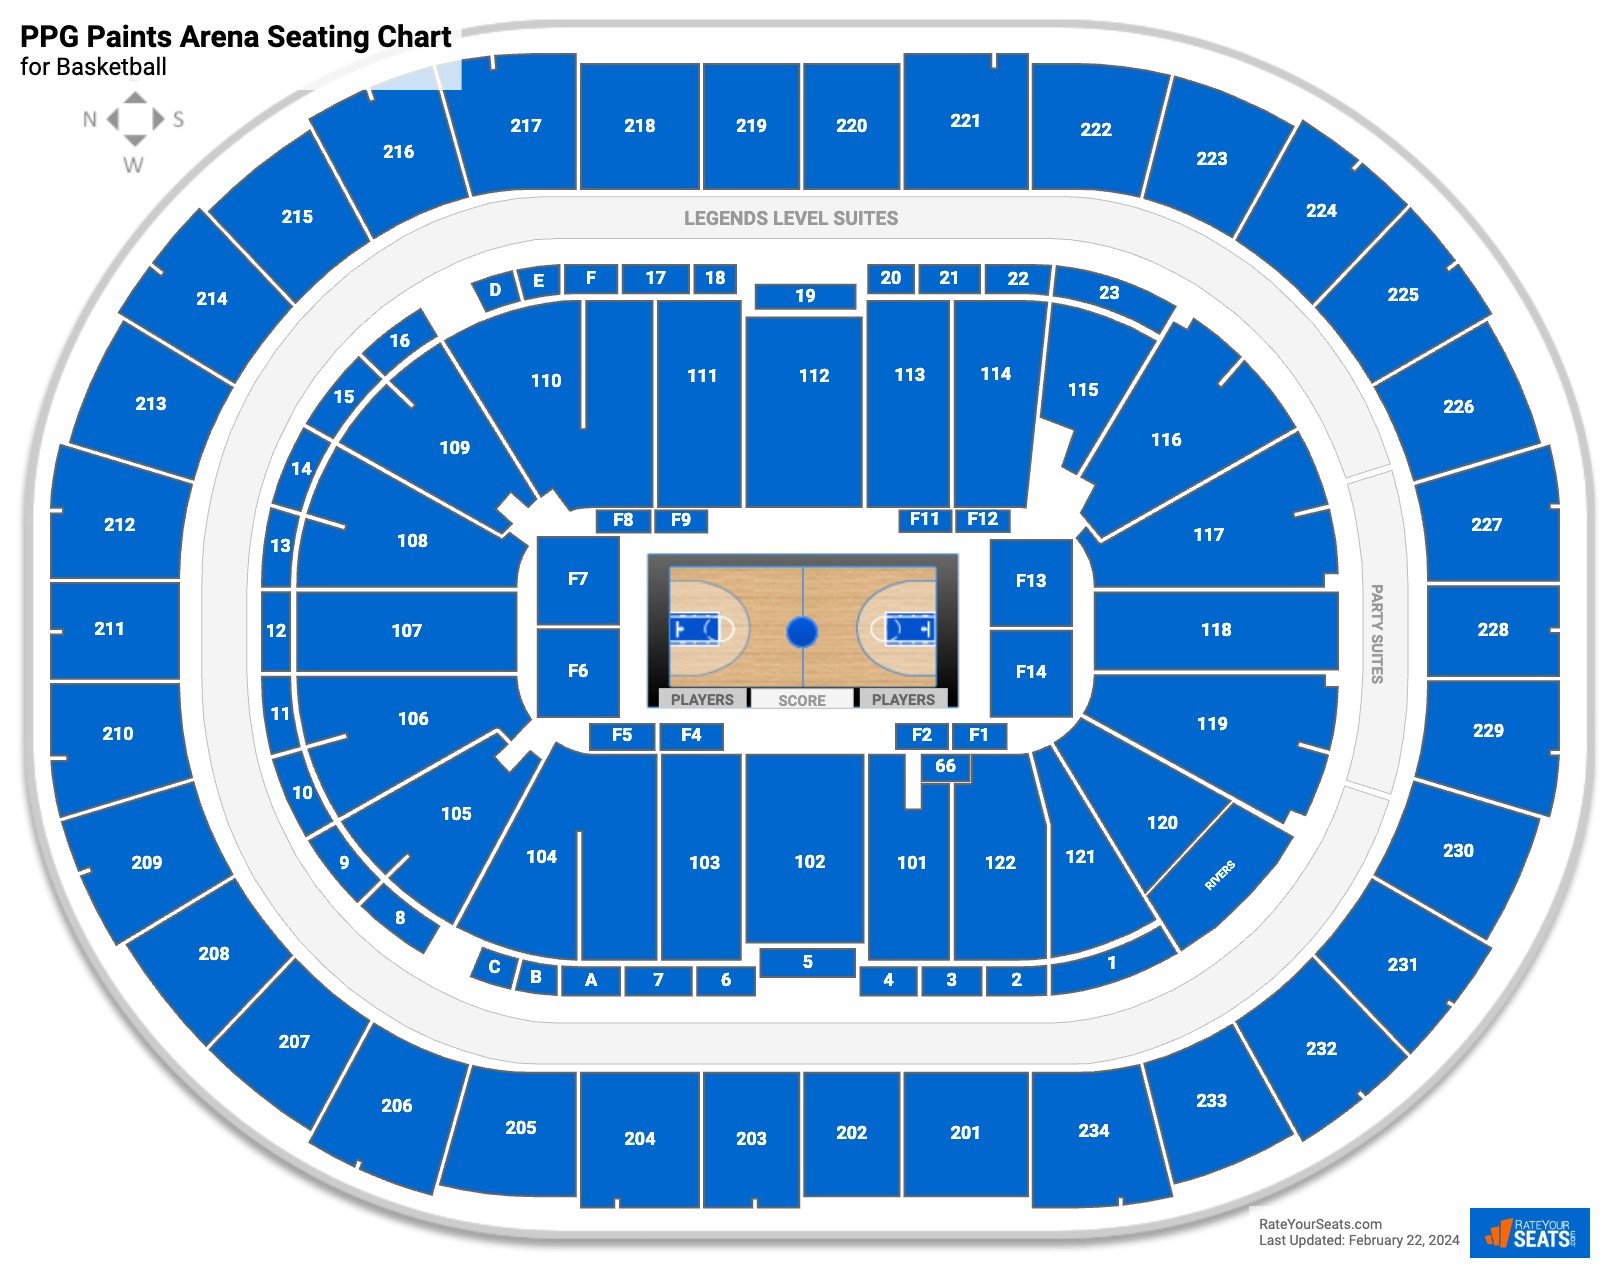 PPG Paints Arena Seating Charts for Basketball